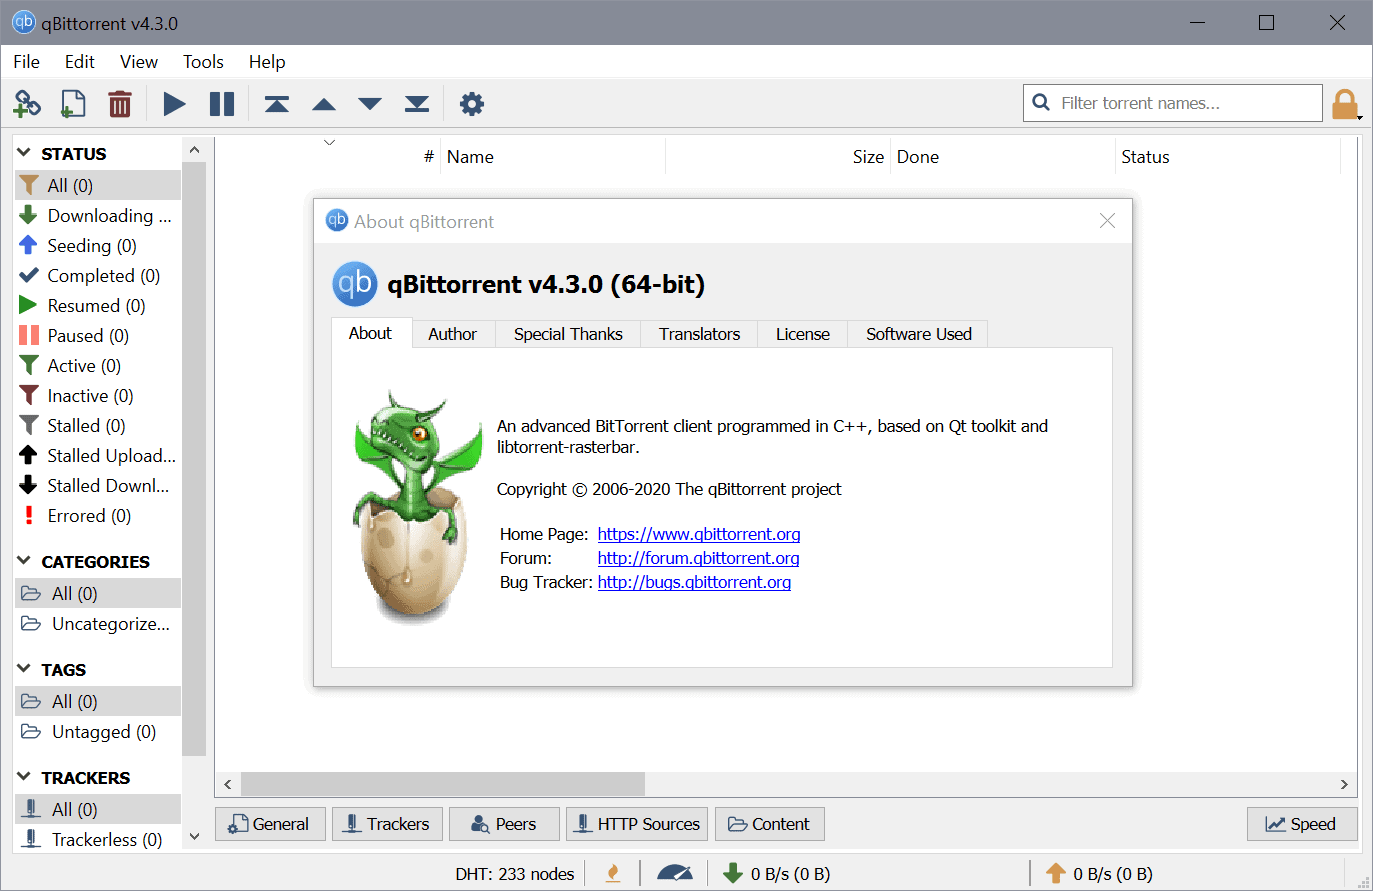 qBittorrent 4.3.0 is a major update with important changes